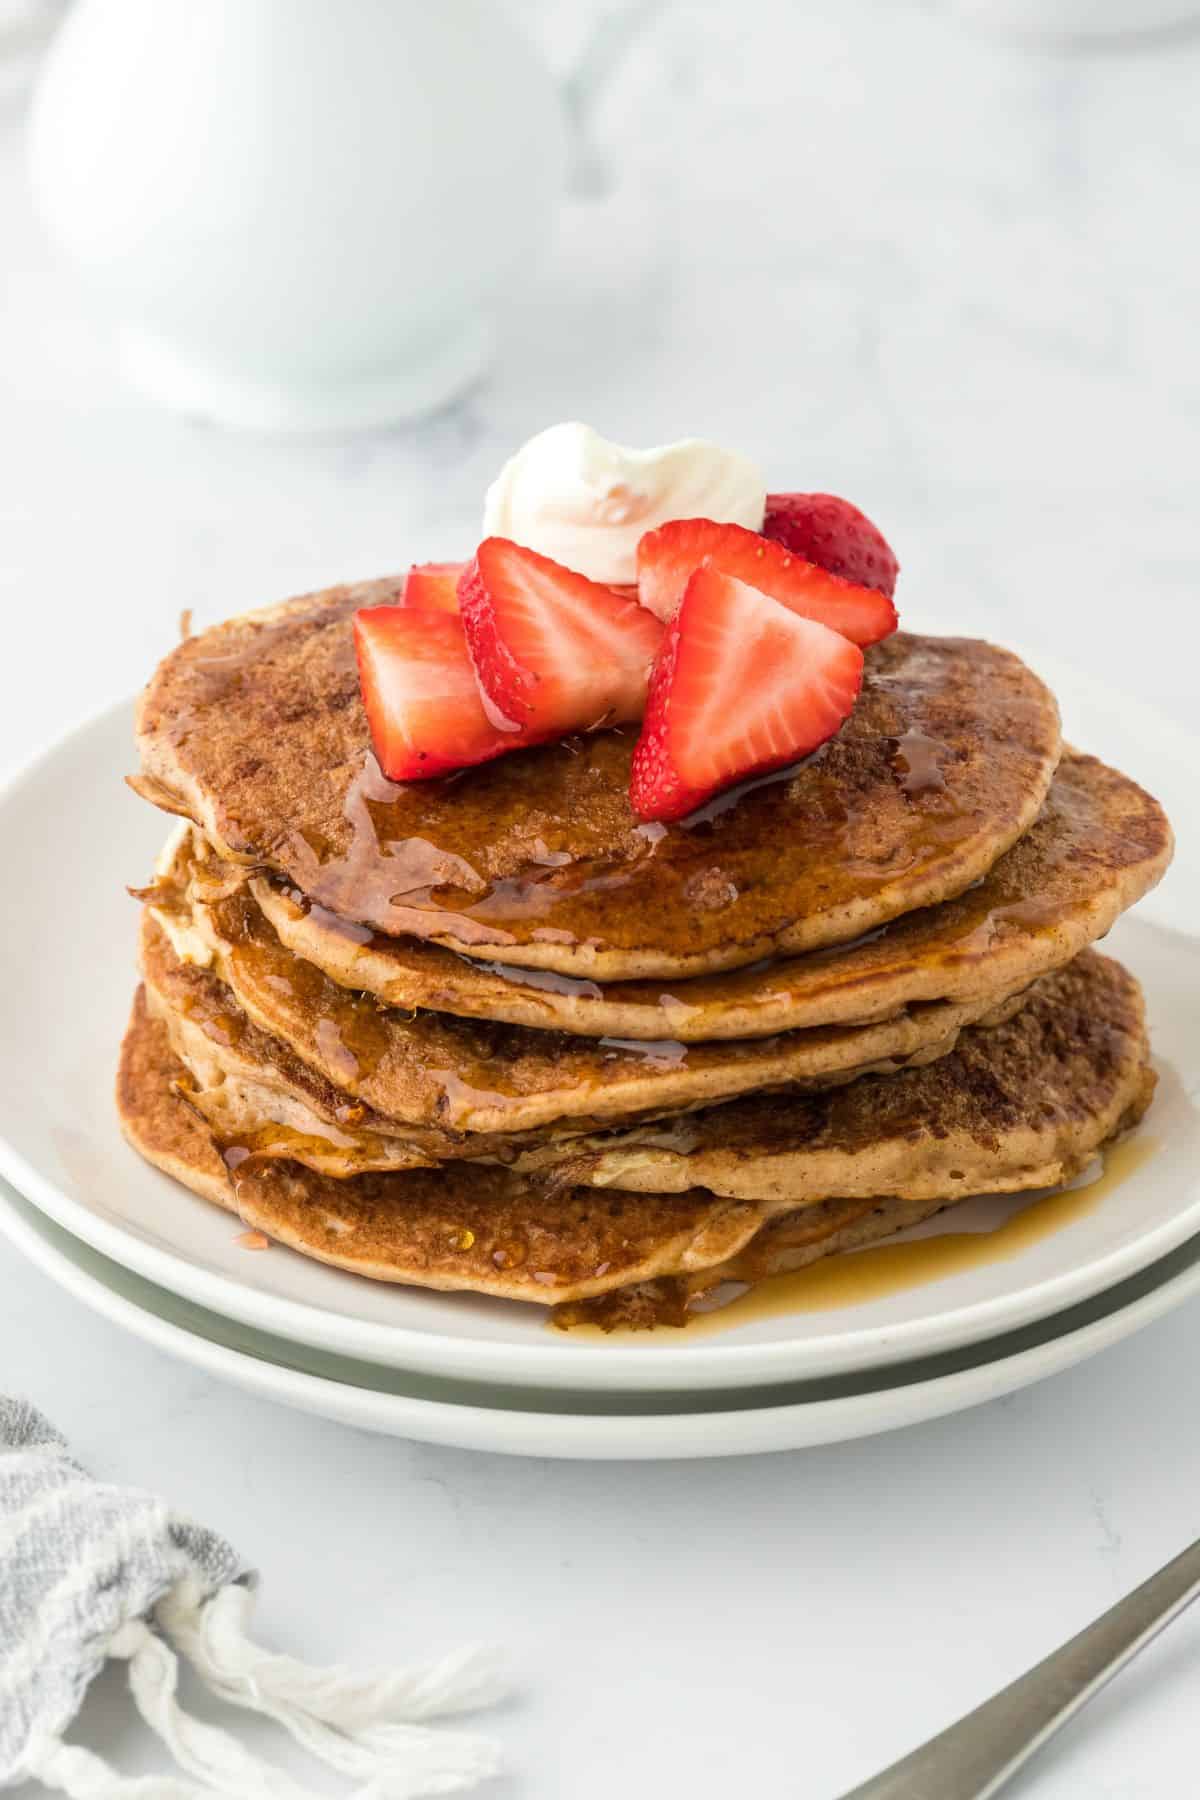 Delicious stack of french toast pancakes recipe with syrup and raspberries ready to serve